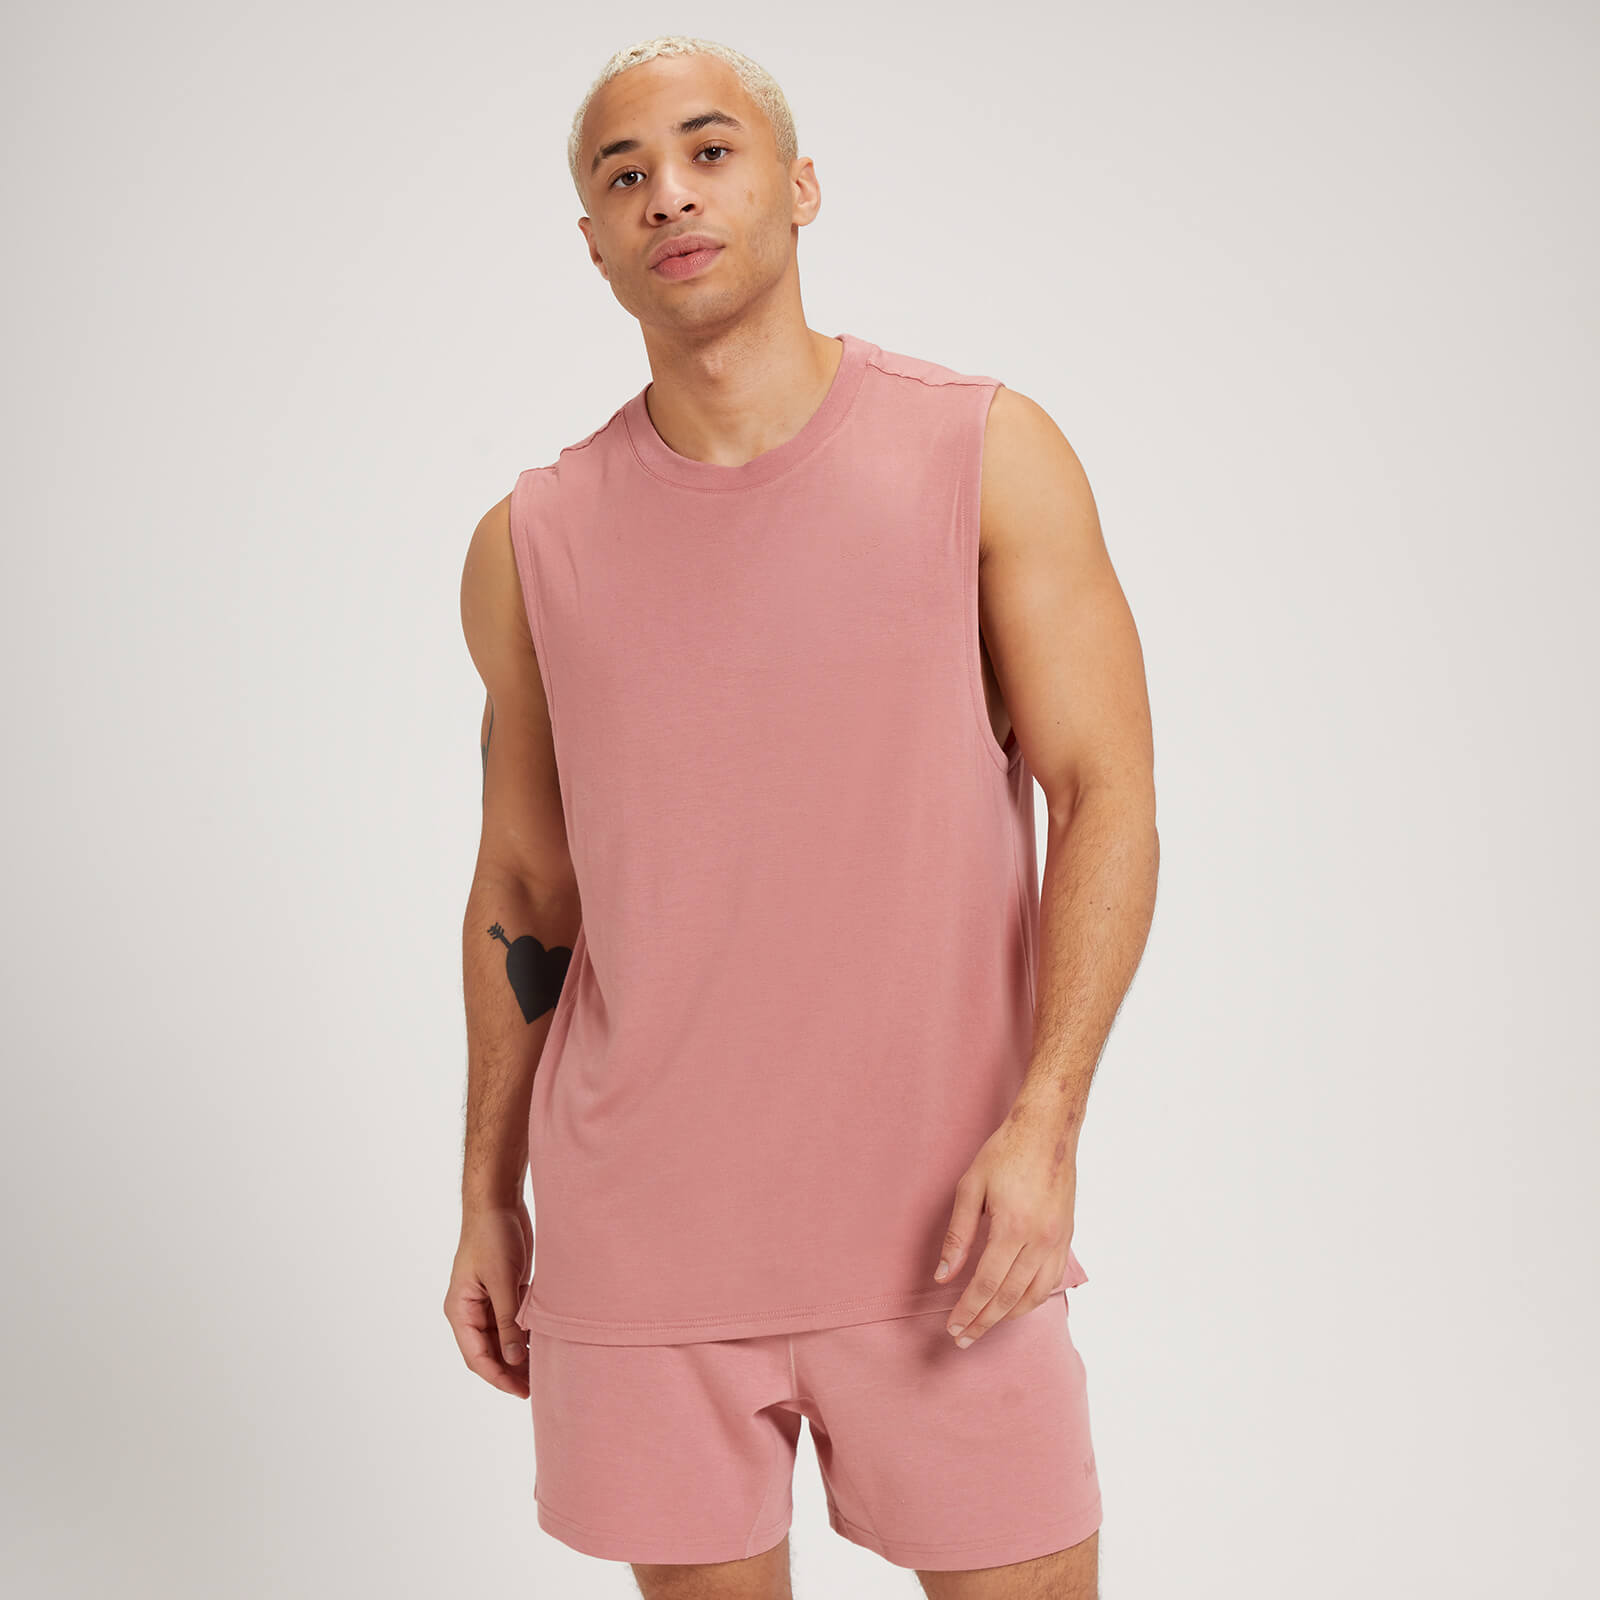 MP Men's Composure Tank Top - Washed Pink - XS